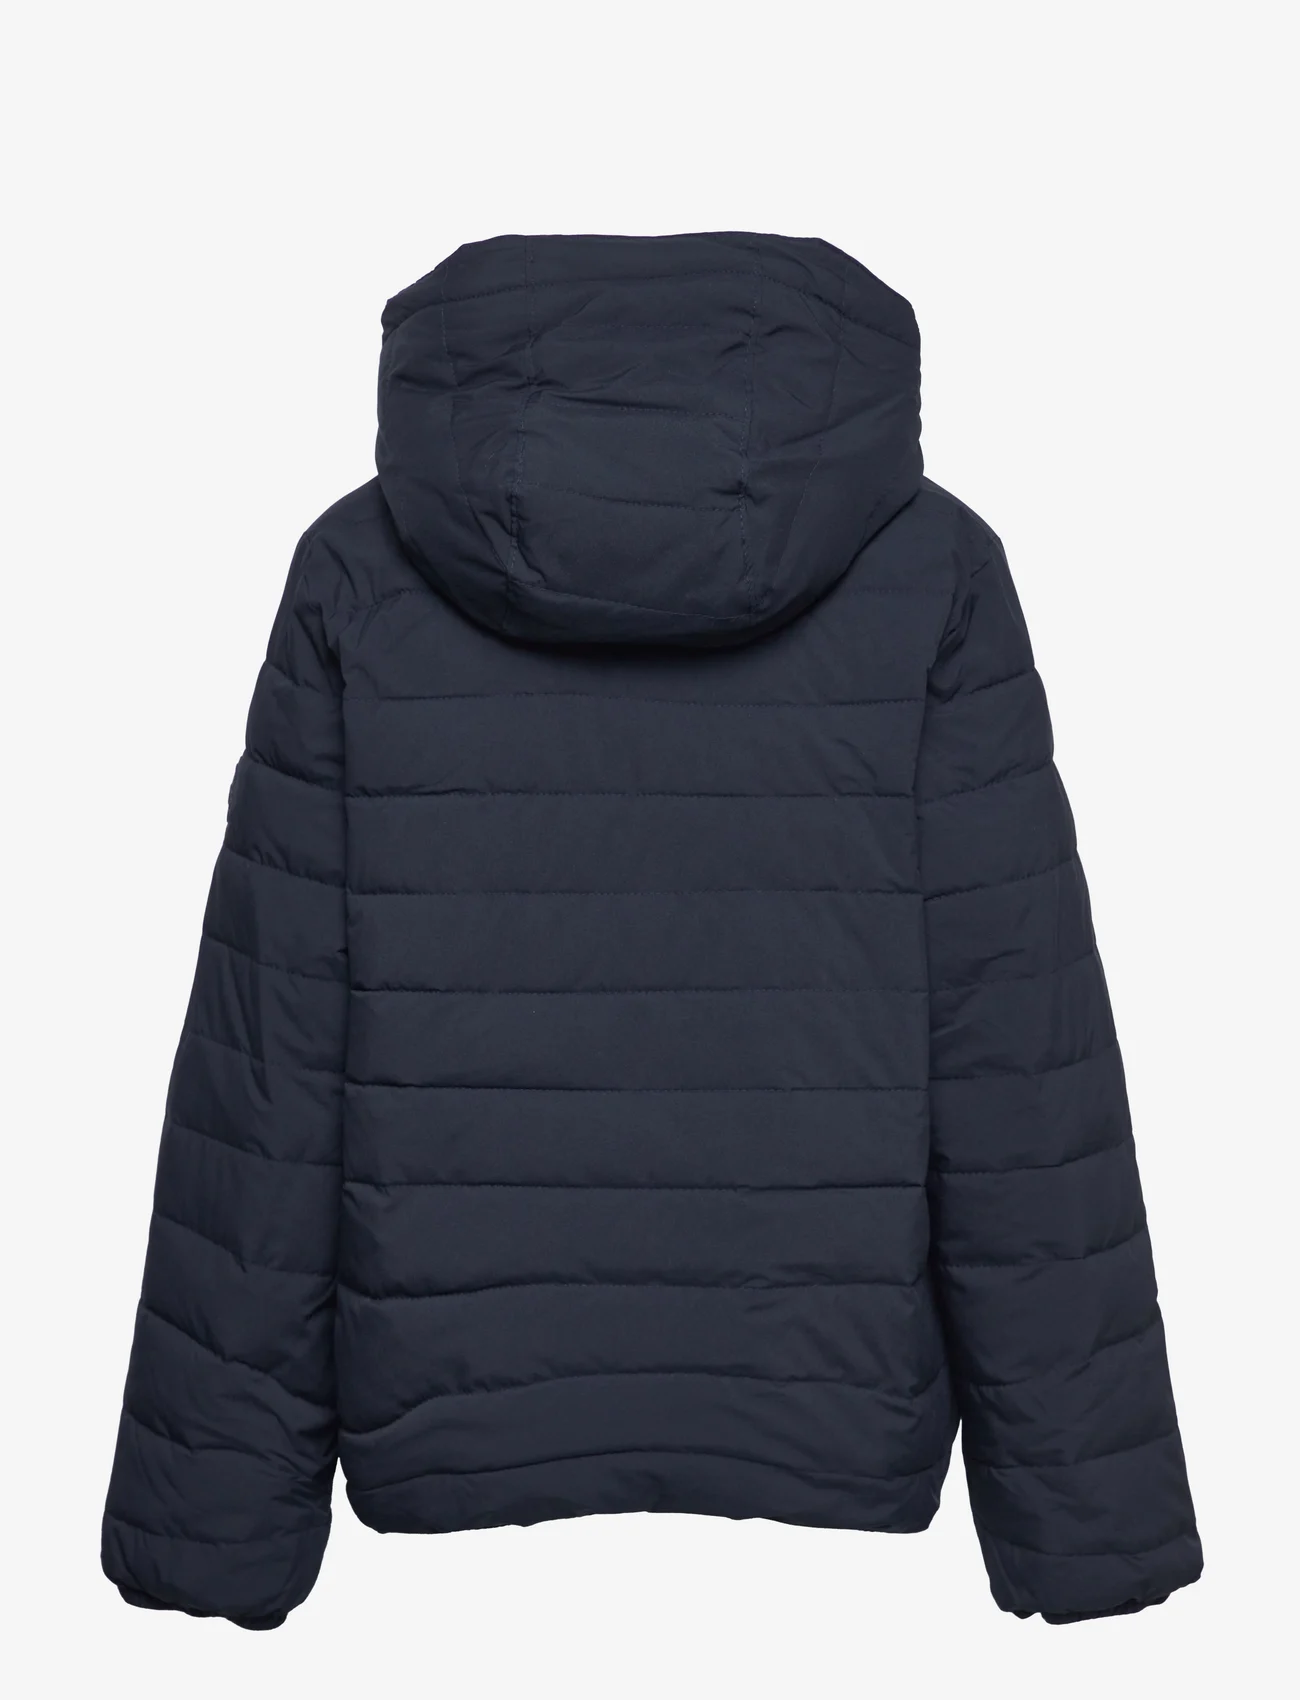 Abercrombie & Fitch - kids BOYS OUTERWEAR - untuva- & toppatakit - navy - 1